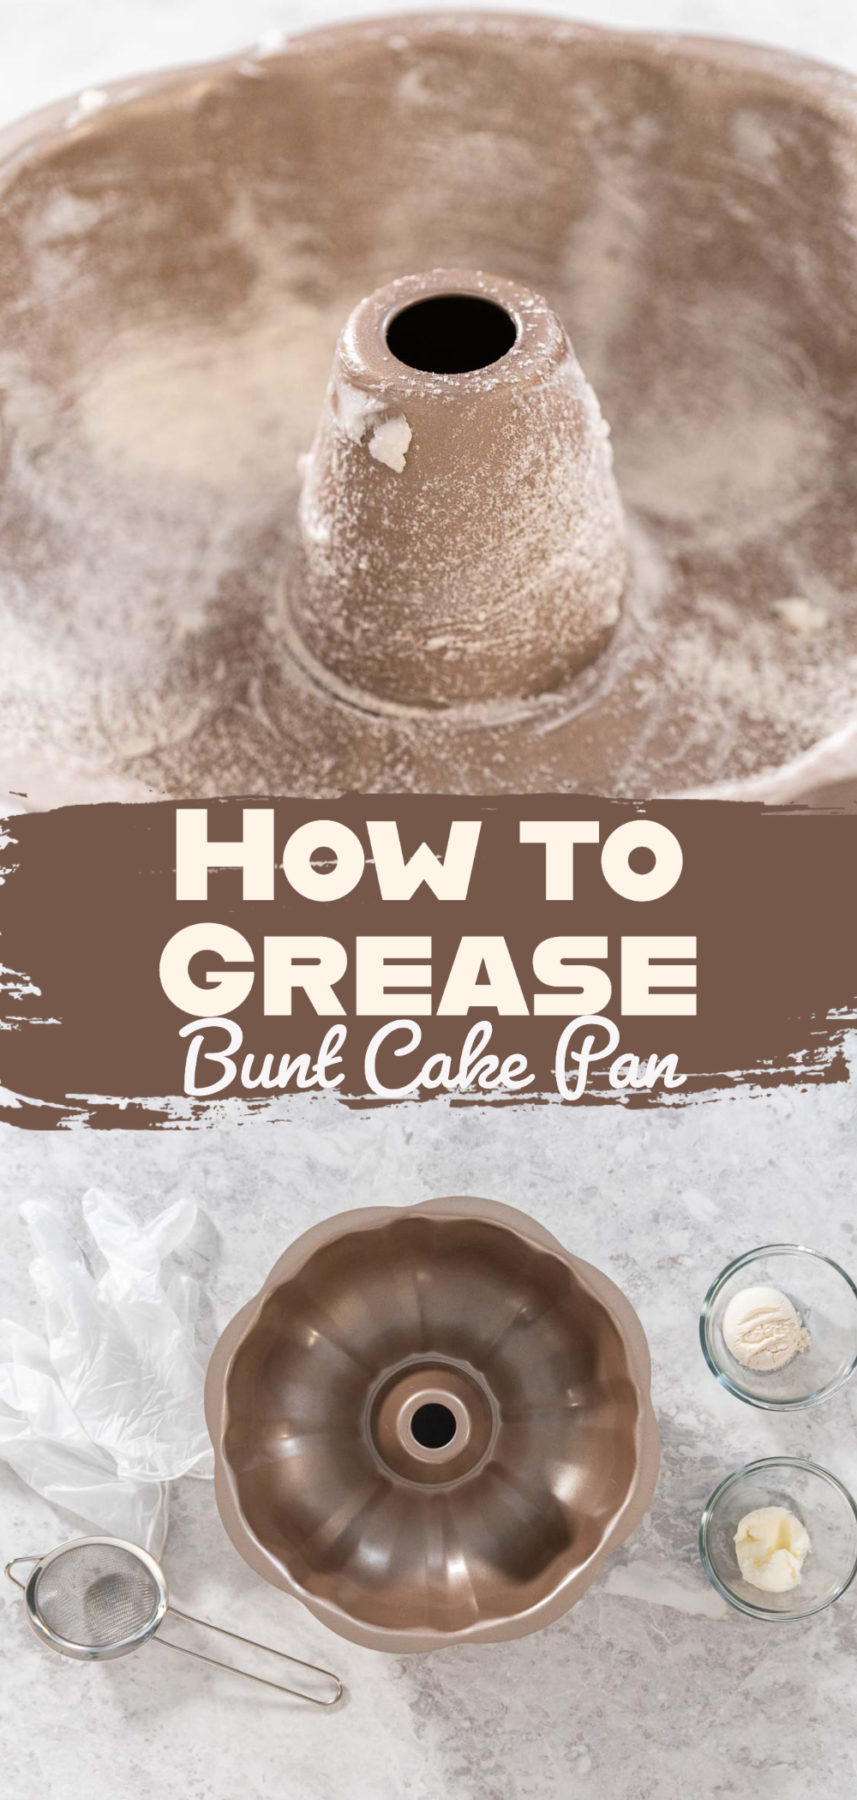 How to Grease Bundt Cake Pan